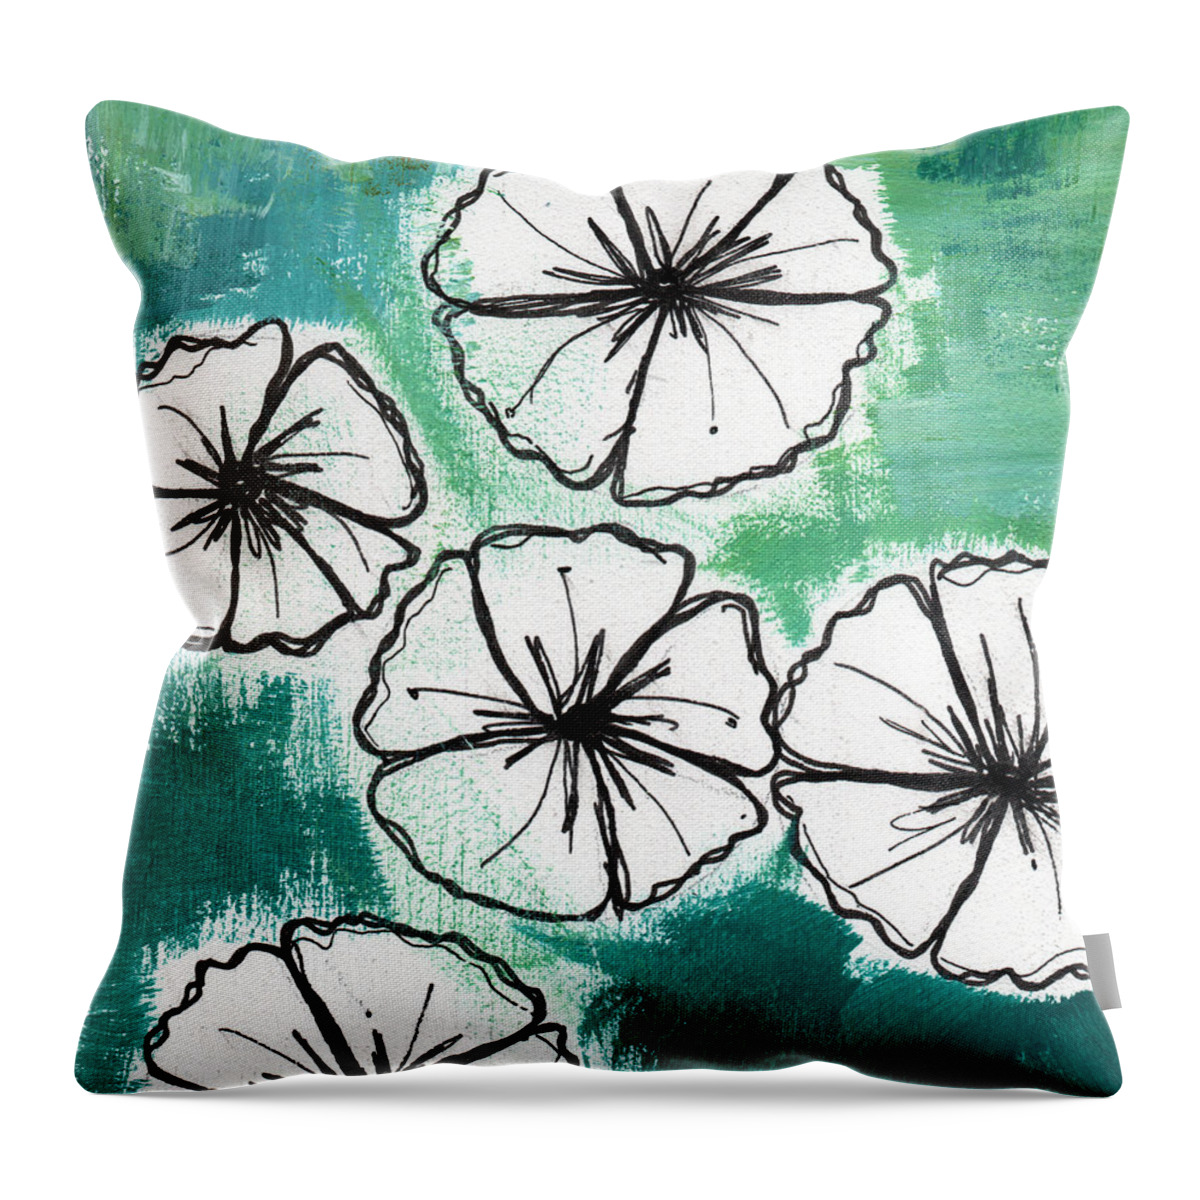 Flowers Throw Pillow featuring the painting White Petunias- Floral Abstract Painting by Linda Woods